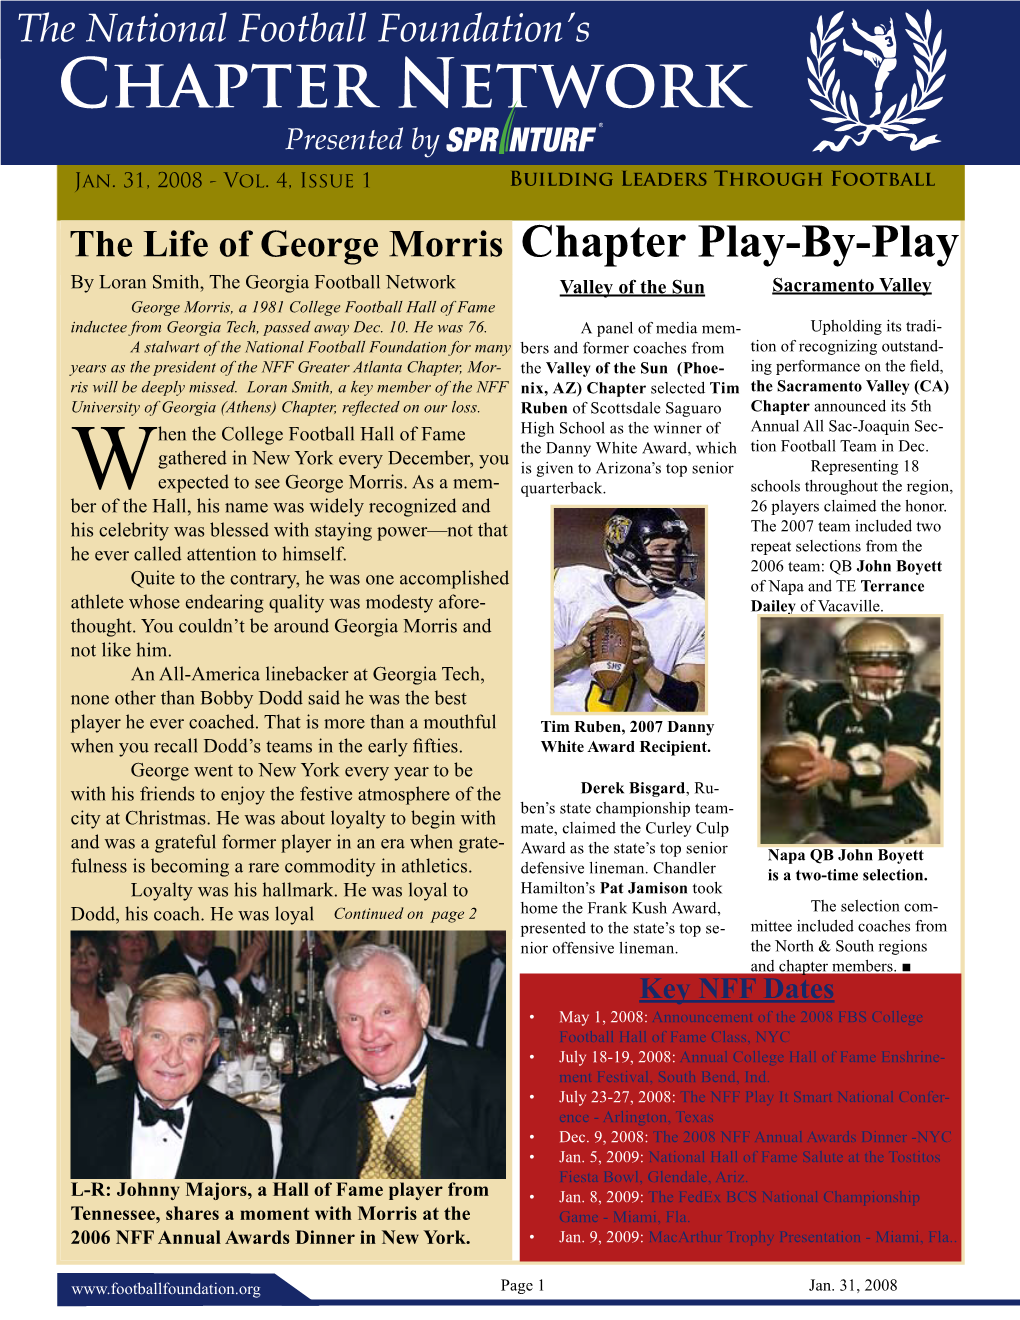 Chapter Network the National Football Foundation's